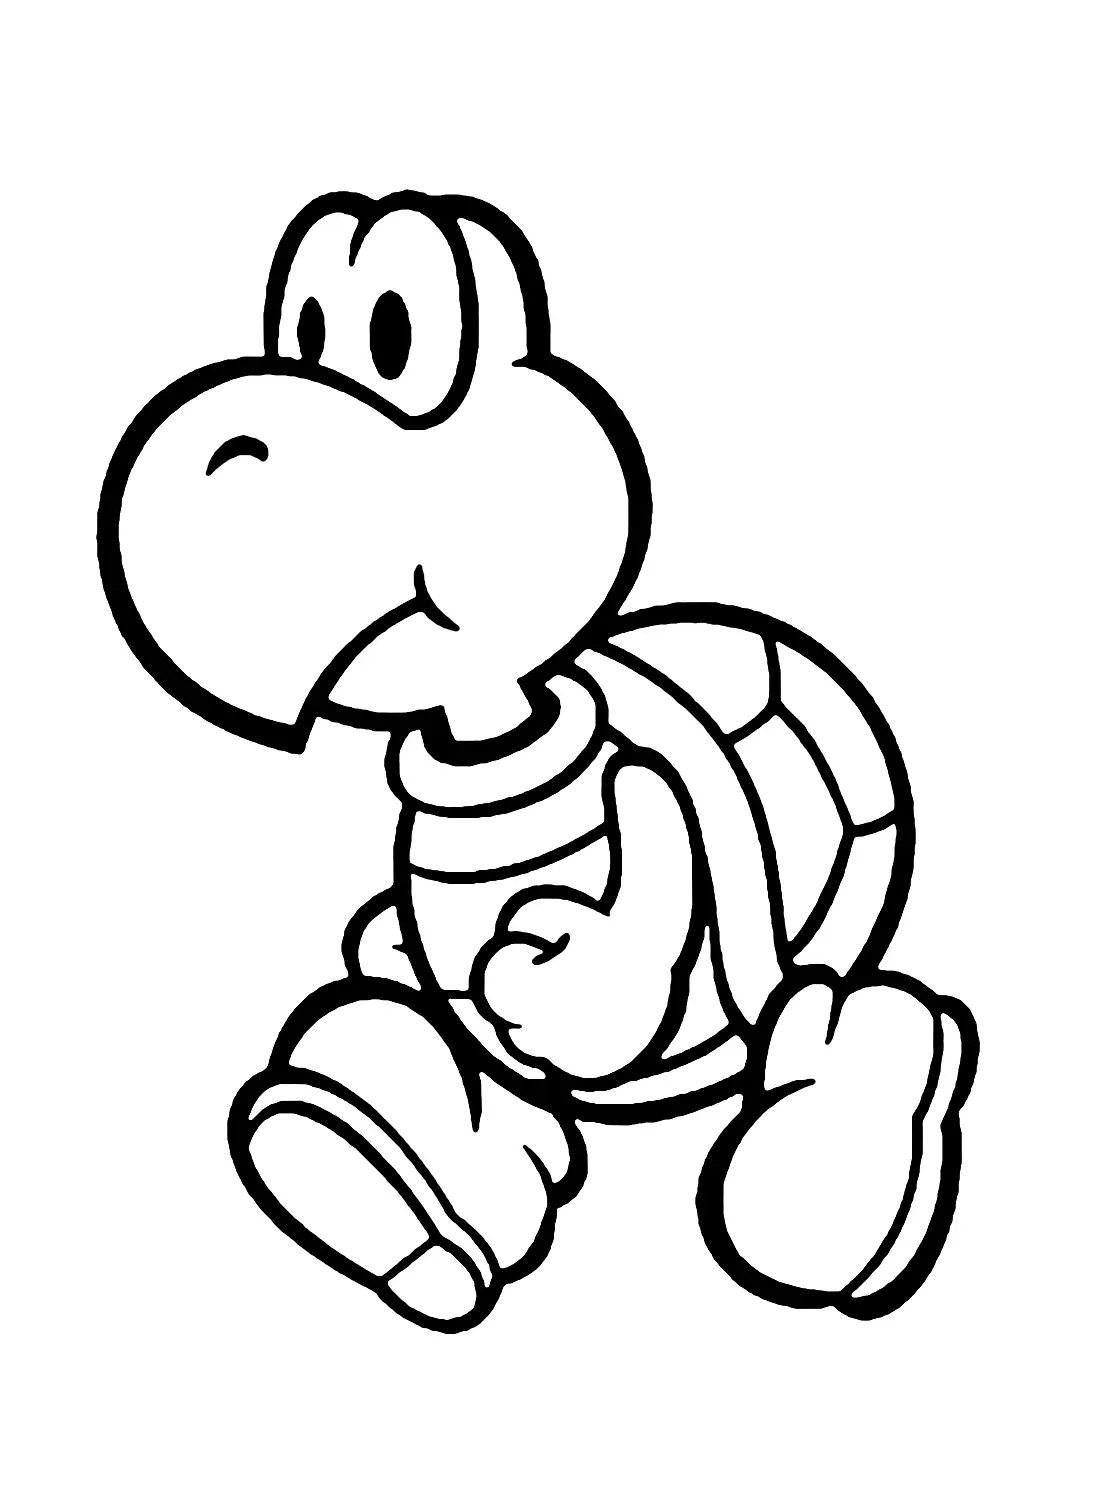 Koopa Troopa Coloring Pages